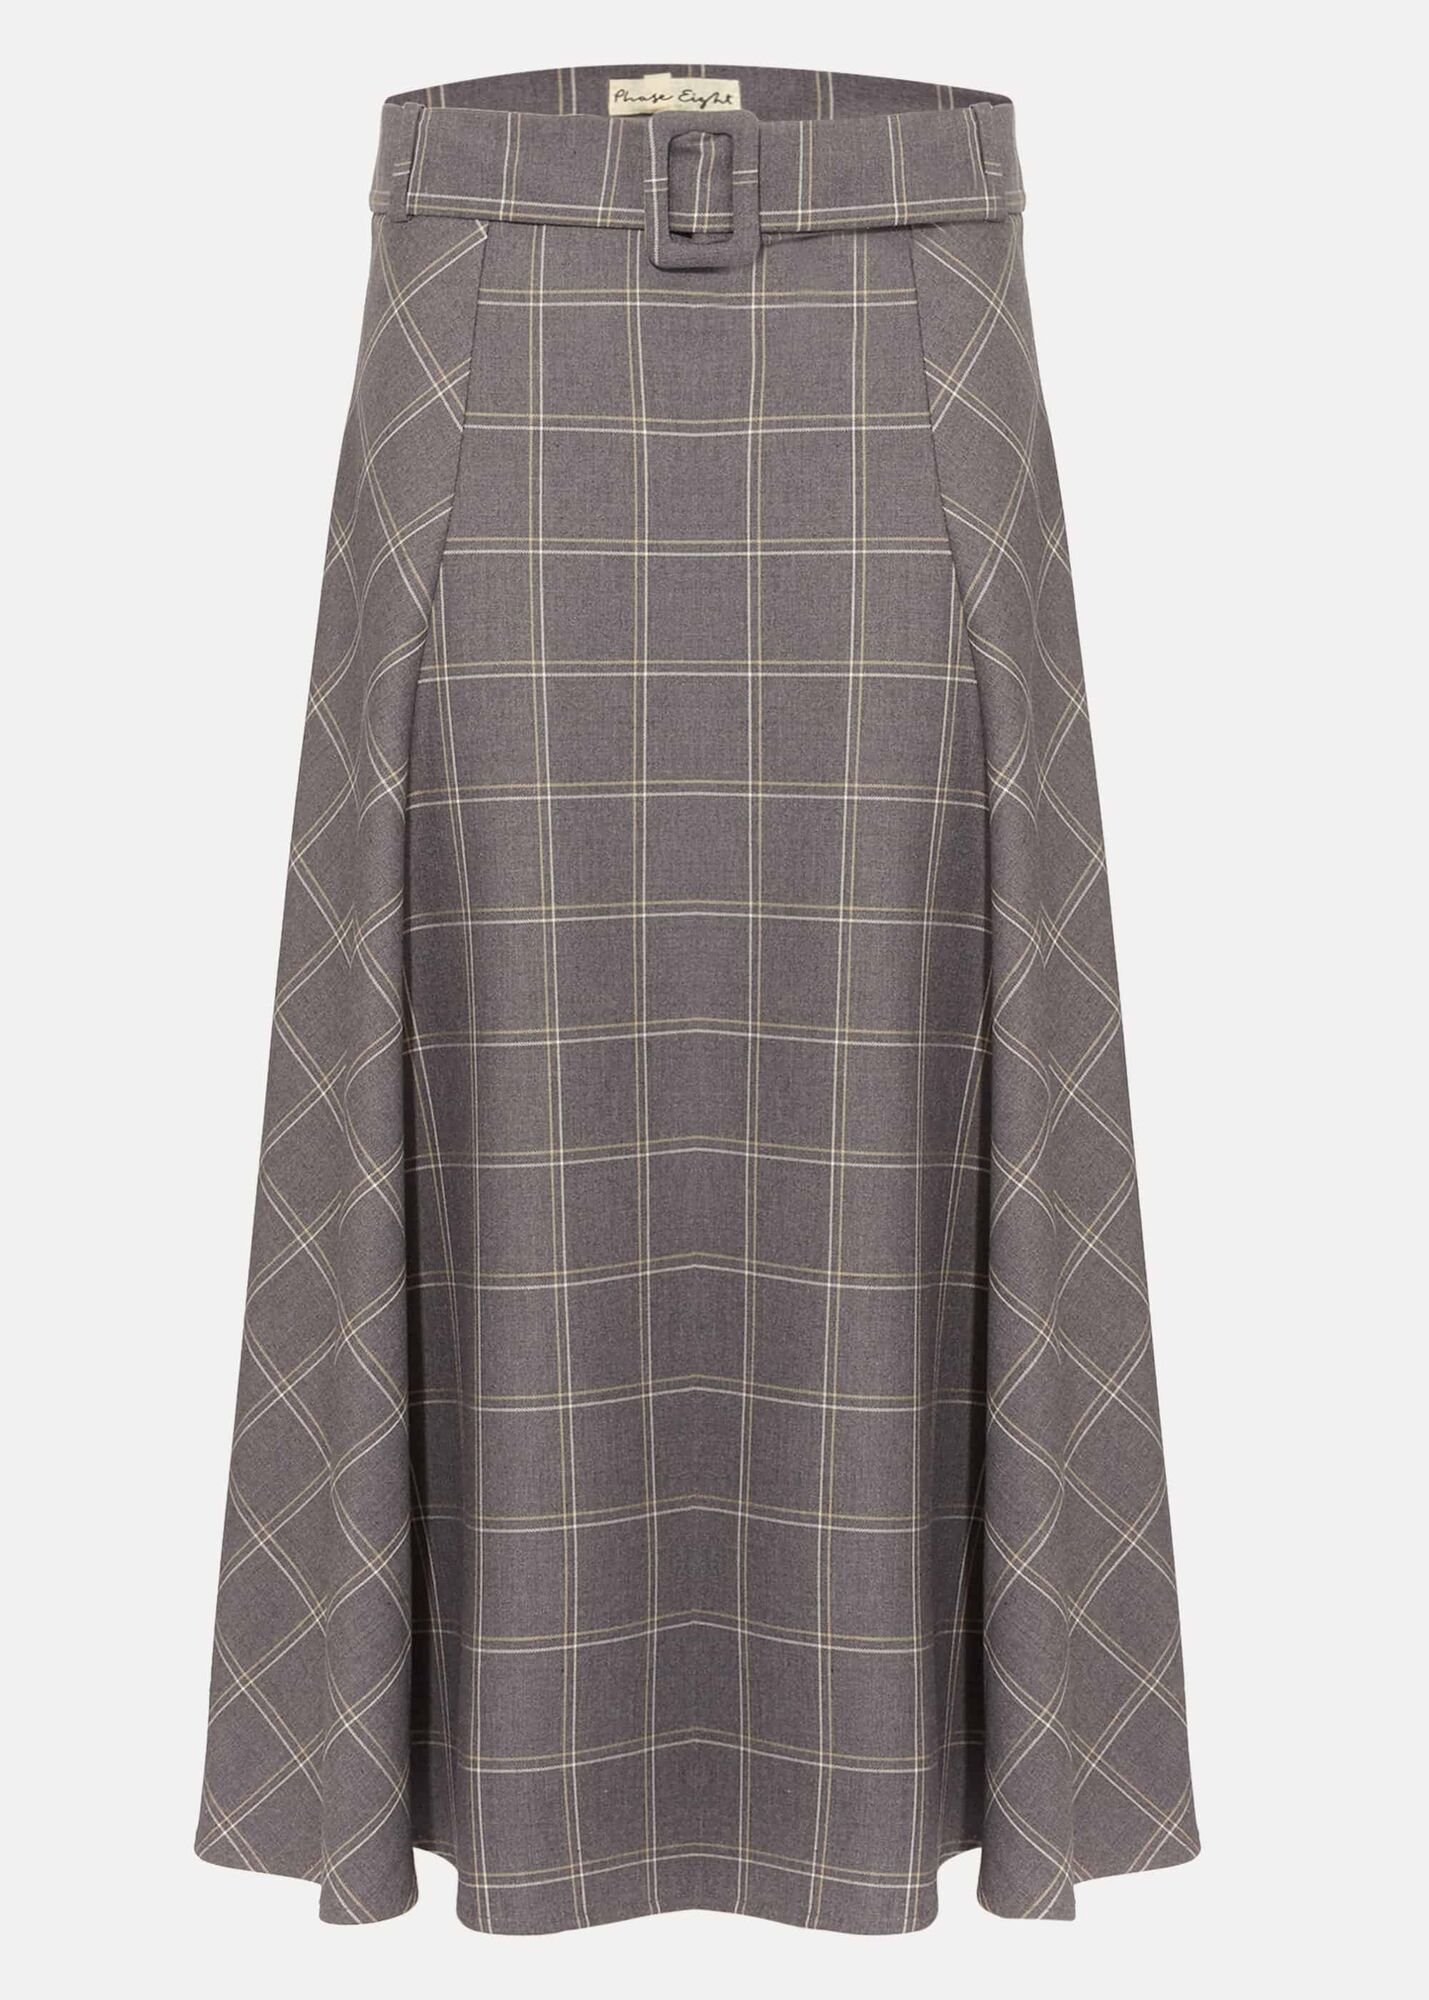 PHASE EIGHT Check A Line Skirt in Grey